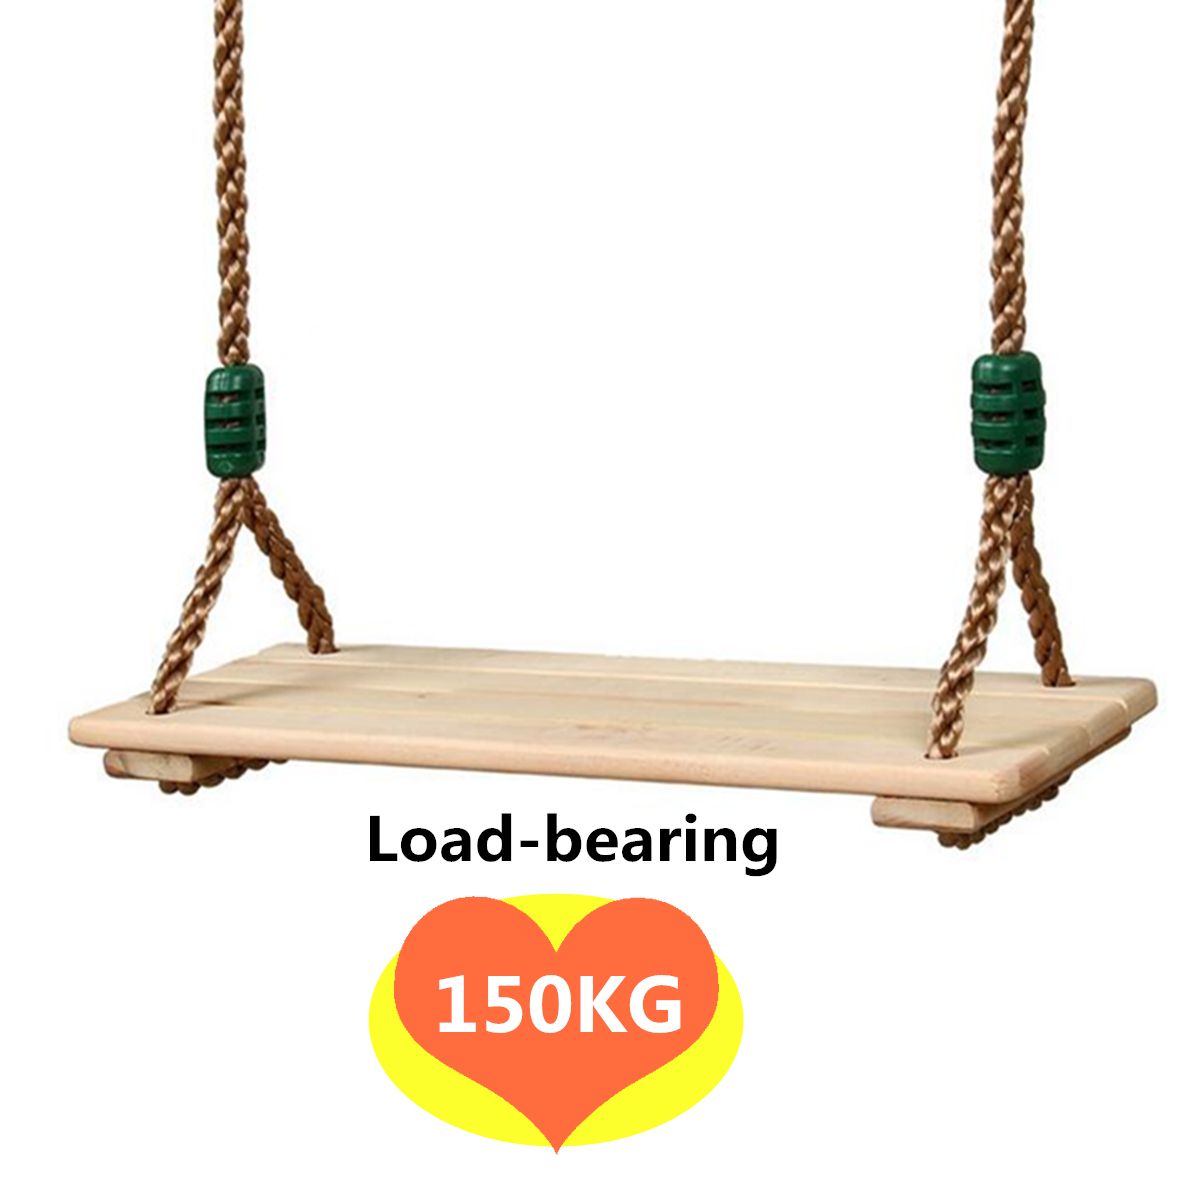 Wooden-Swings-Seat-Child-Adult-Garden-Outdoor-Yard-Tree-Swing-Play-Birthday-Gift-Decorations-1443735